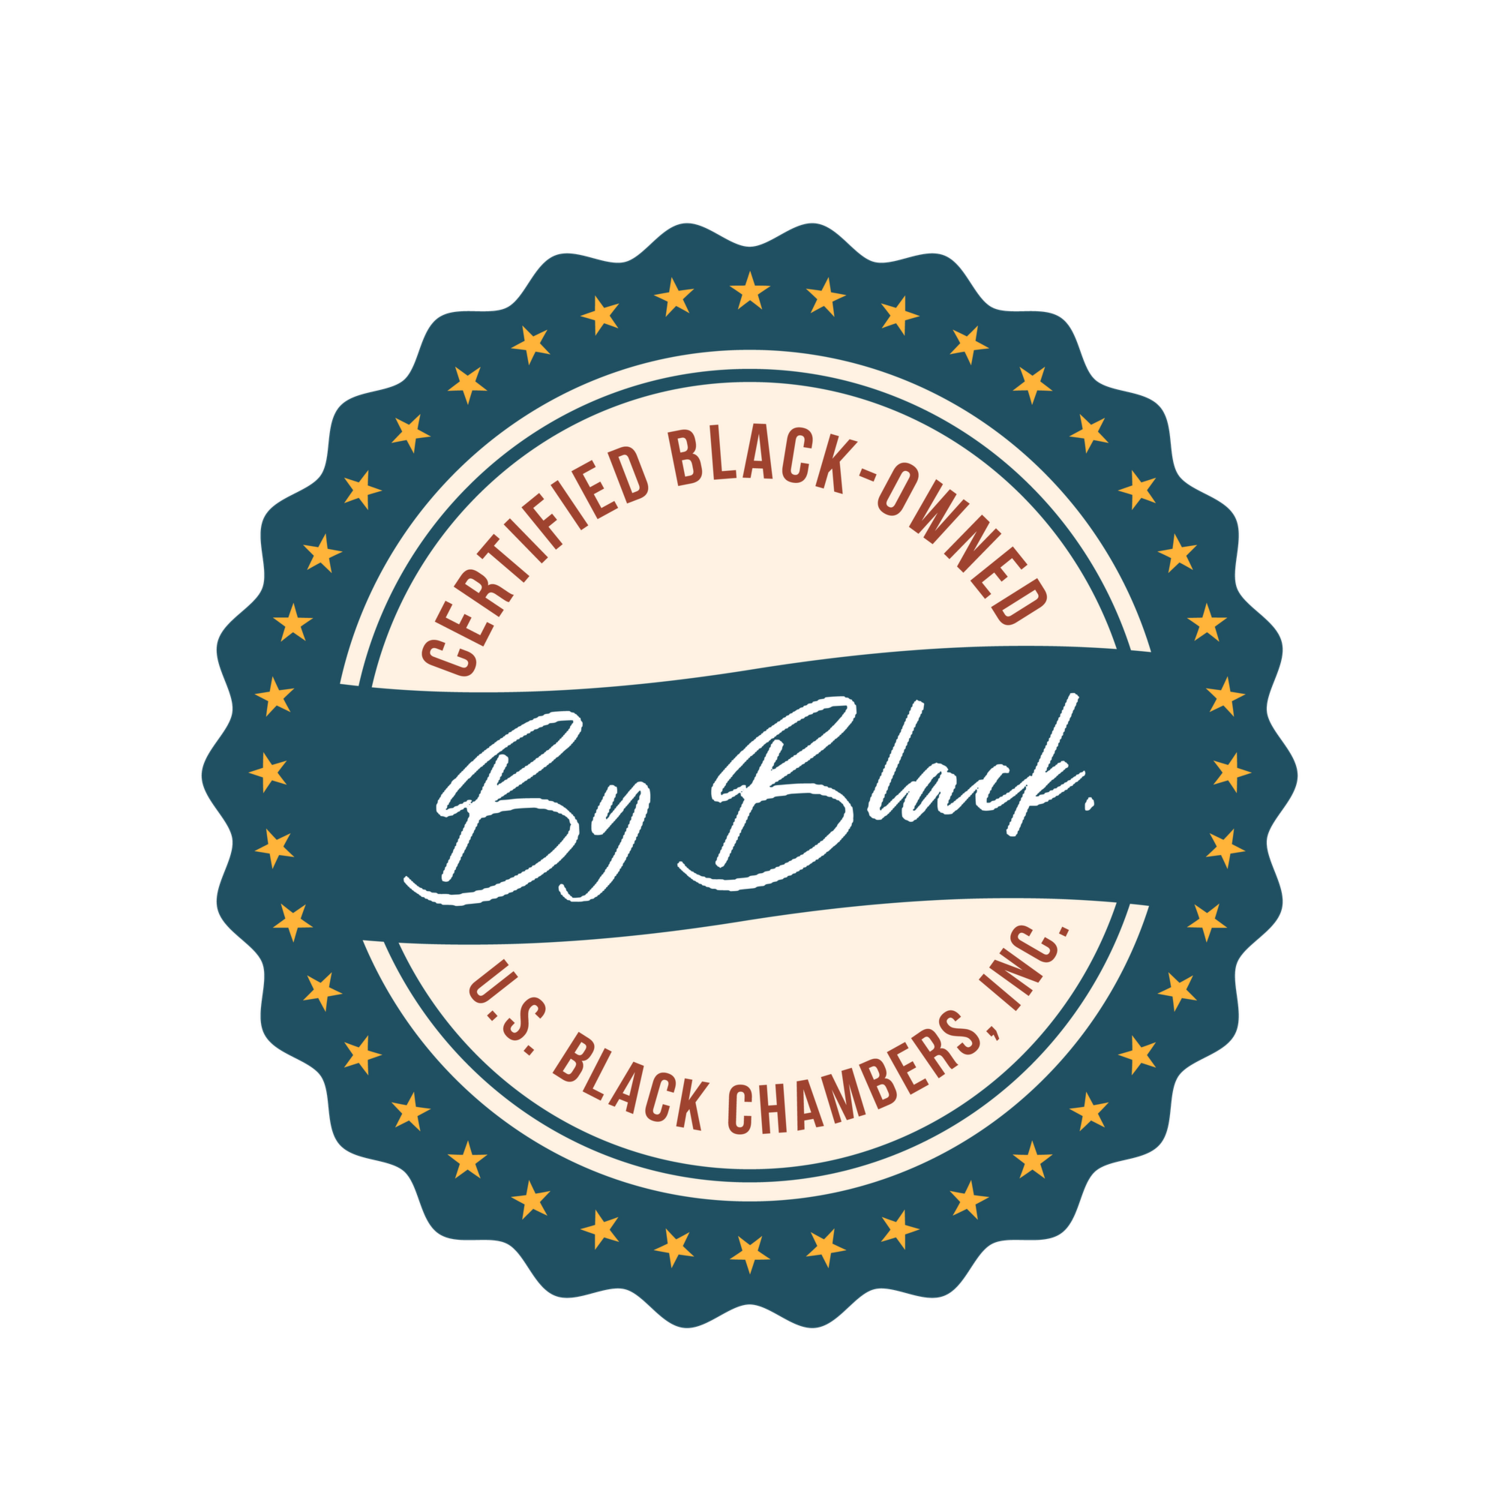 US Black Chamber Inc. Certified Black Owned